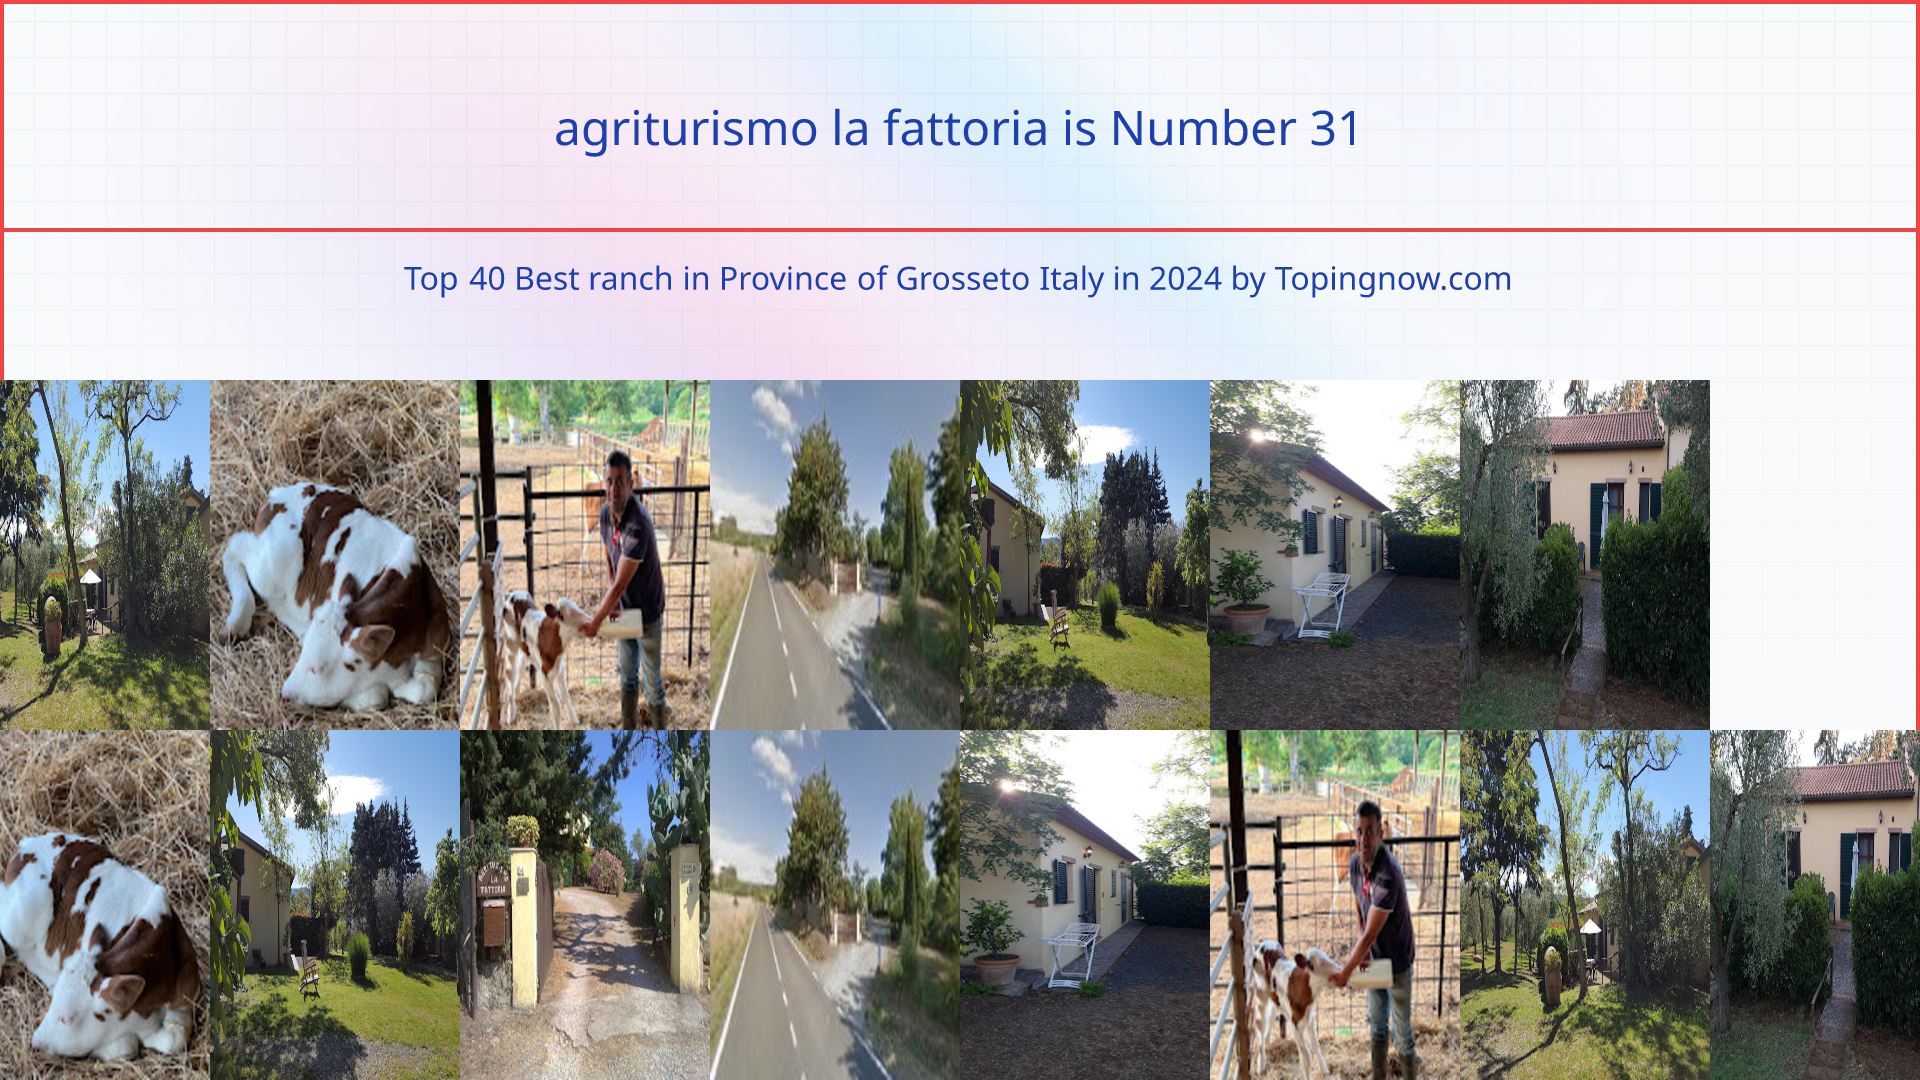 agriturismo la fattoria: Top 40 Best ranch in Province of Grosseto Italy in 2024